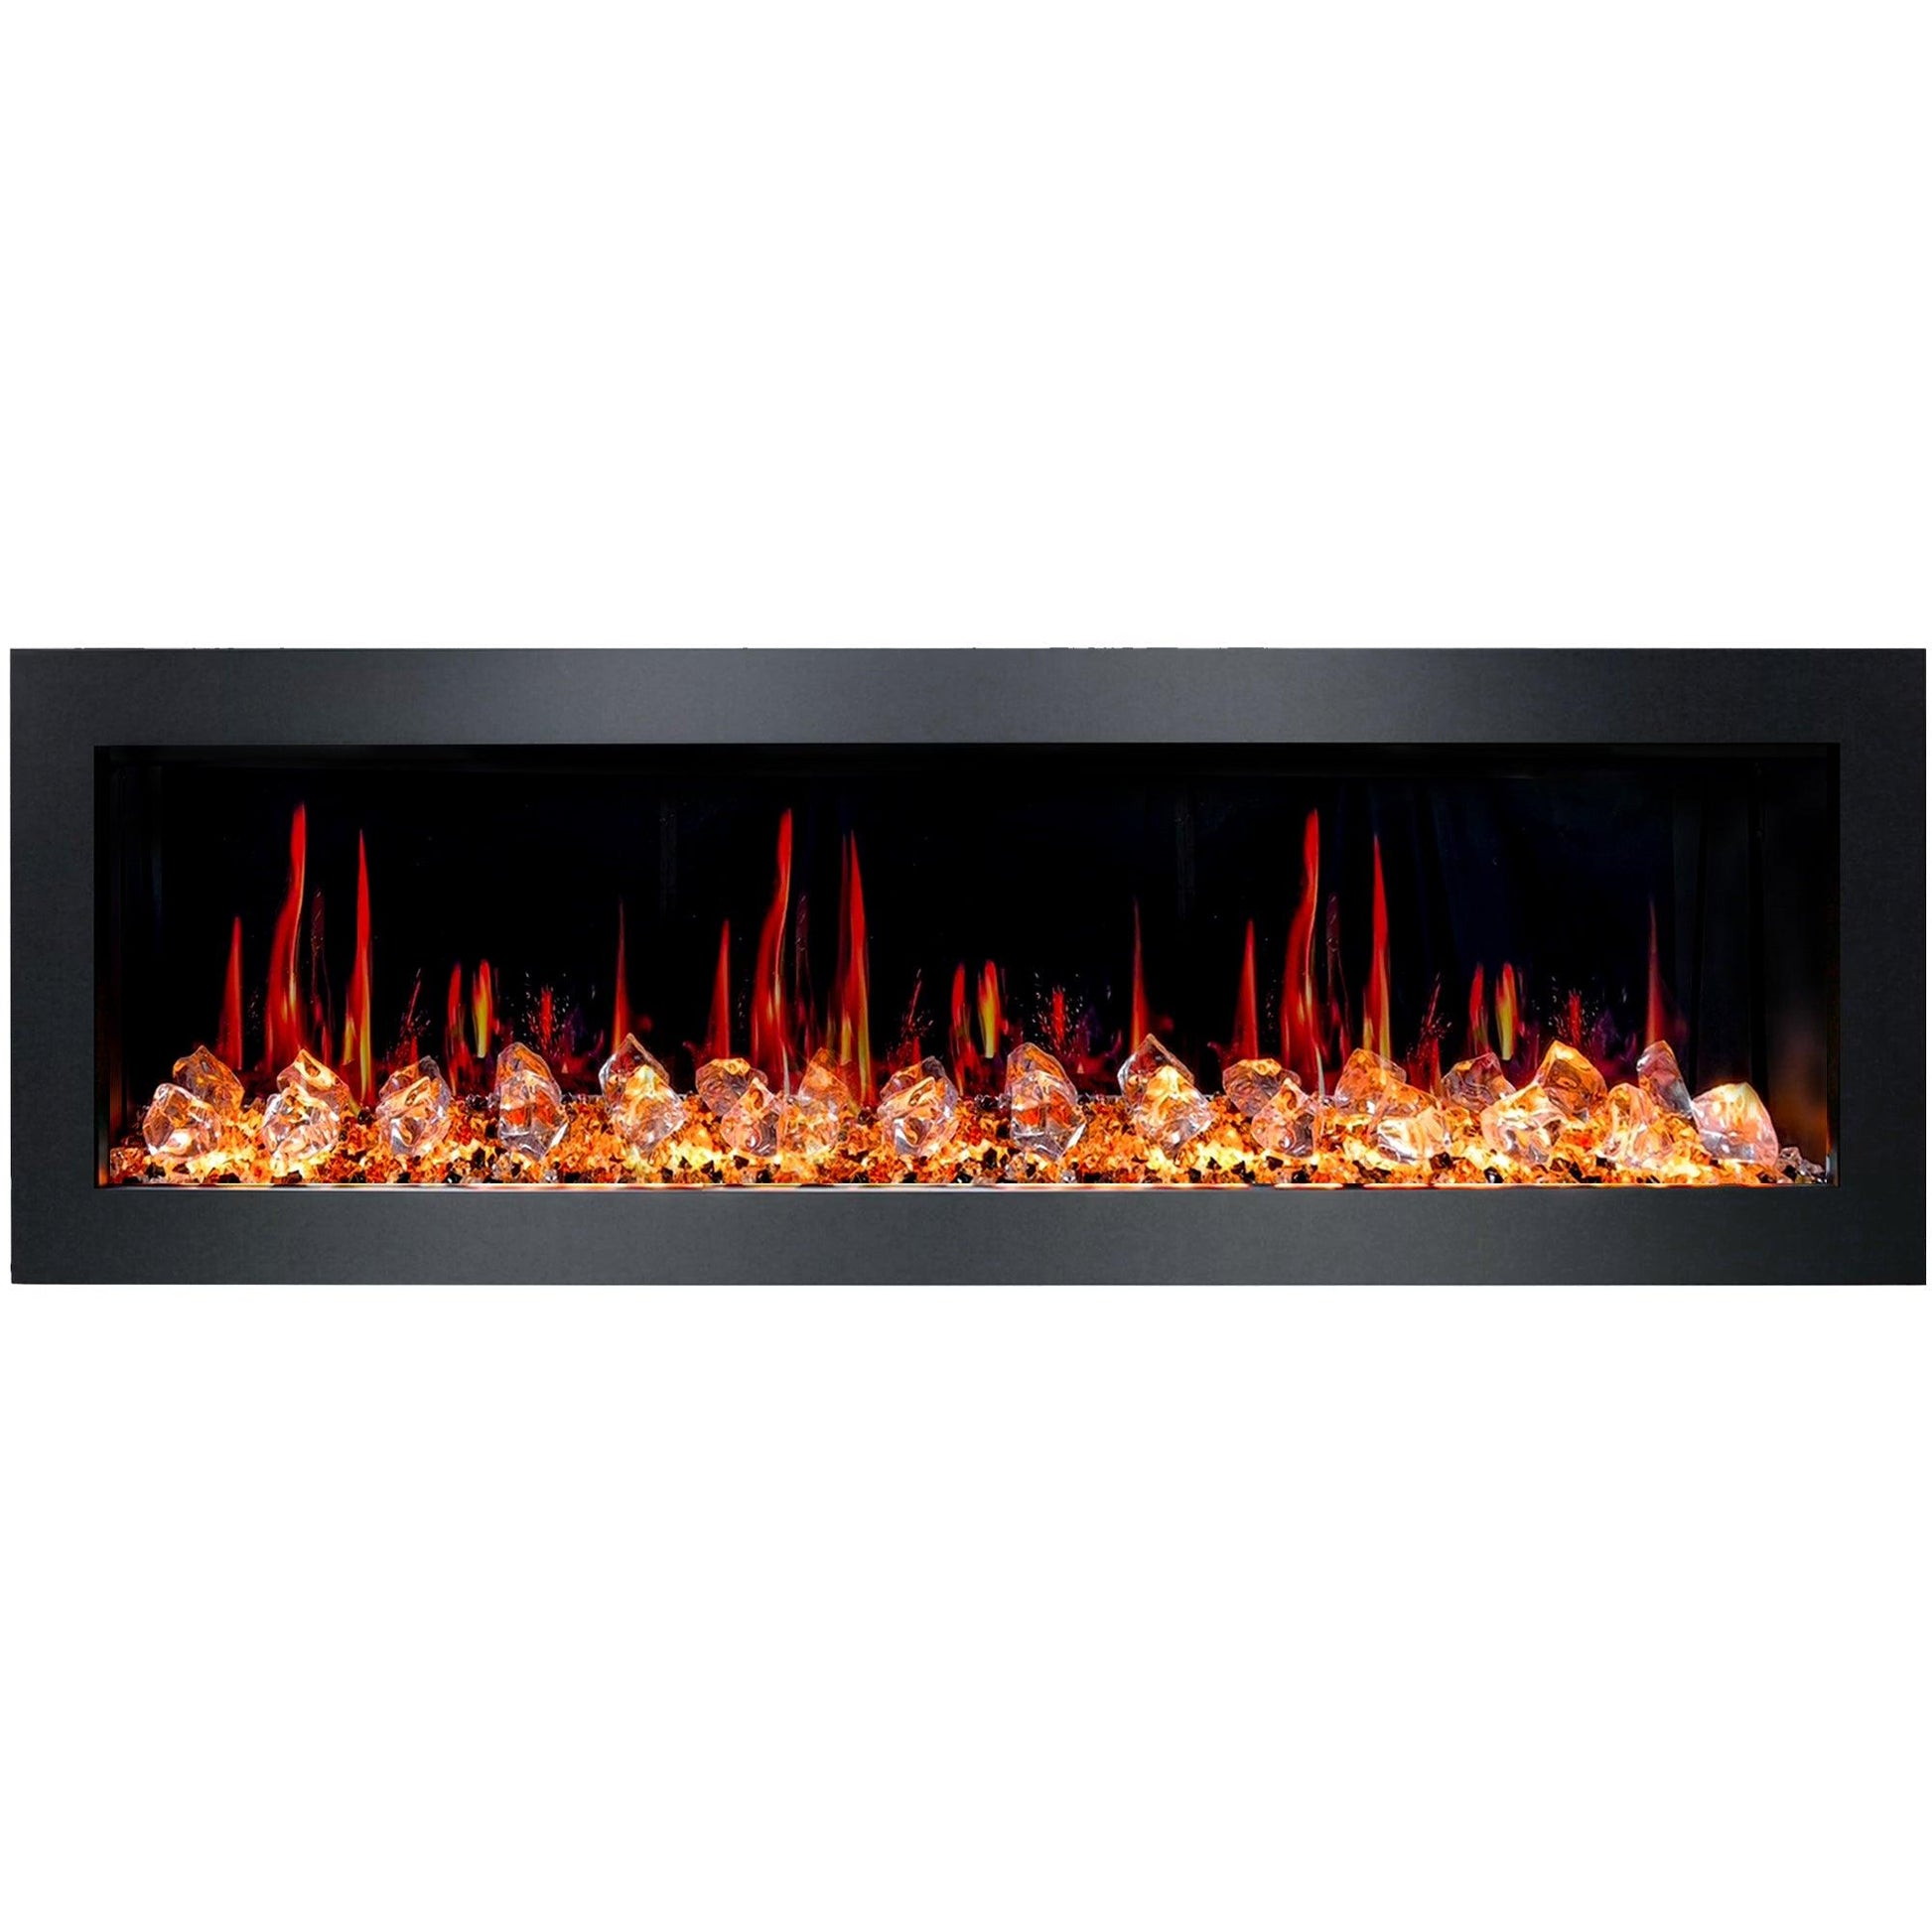 ZopaFlame™ 67" Linear Wall-mount Electric Fireplace - BC17688X - ZopaFlame Fireplaces